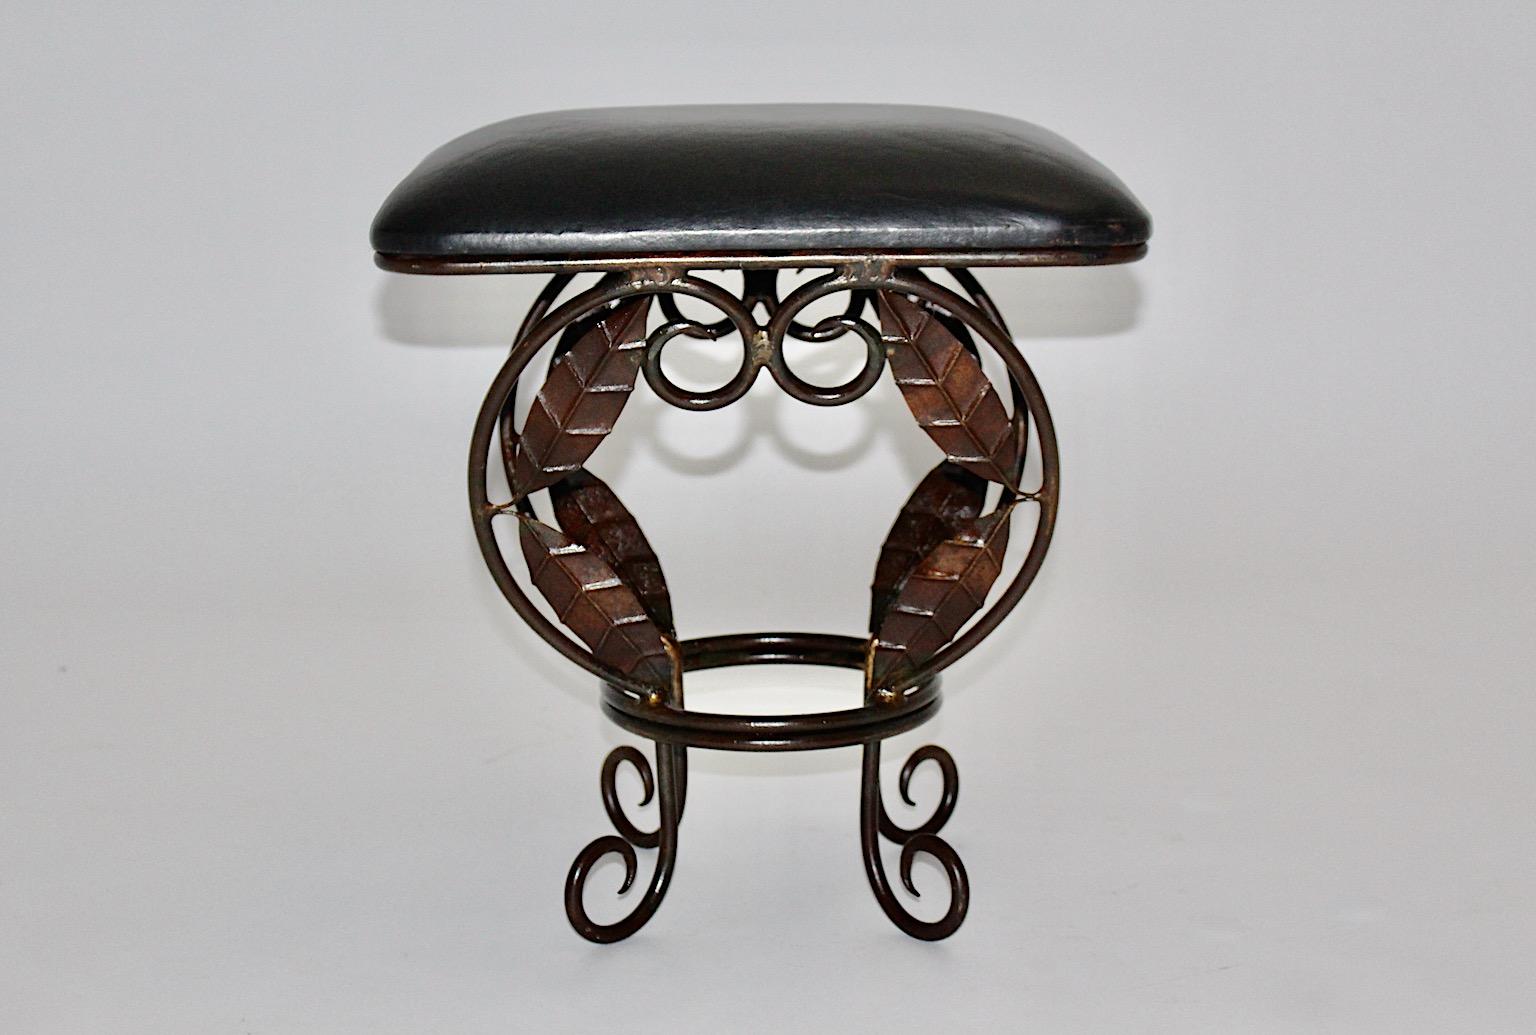 Brown vintage Hollywood Regency style metal stool from iron base with black leather seat designed 1970s, France.
The base demonstrates stunning leaves and ornaments, while the seat is covered with black leather.
The vintage condition is very good